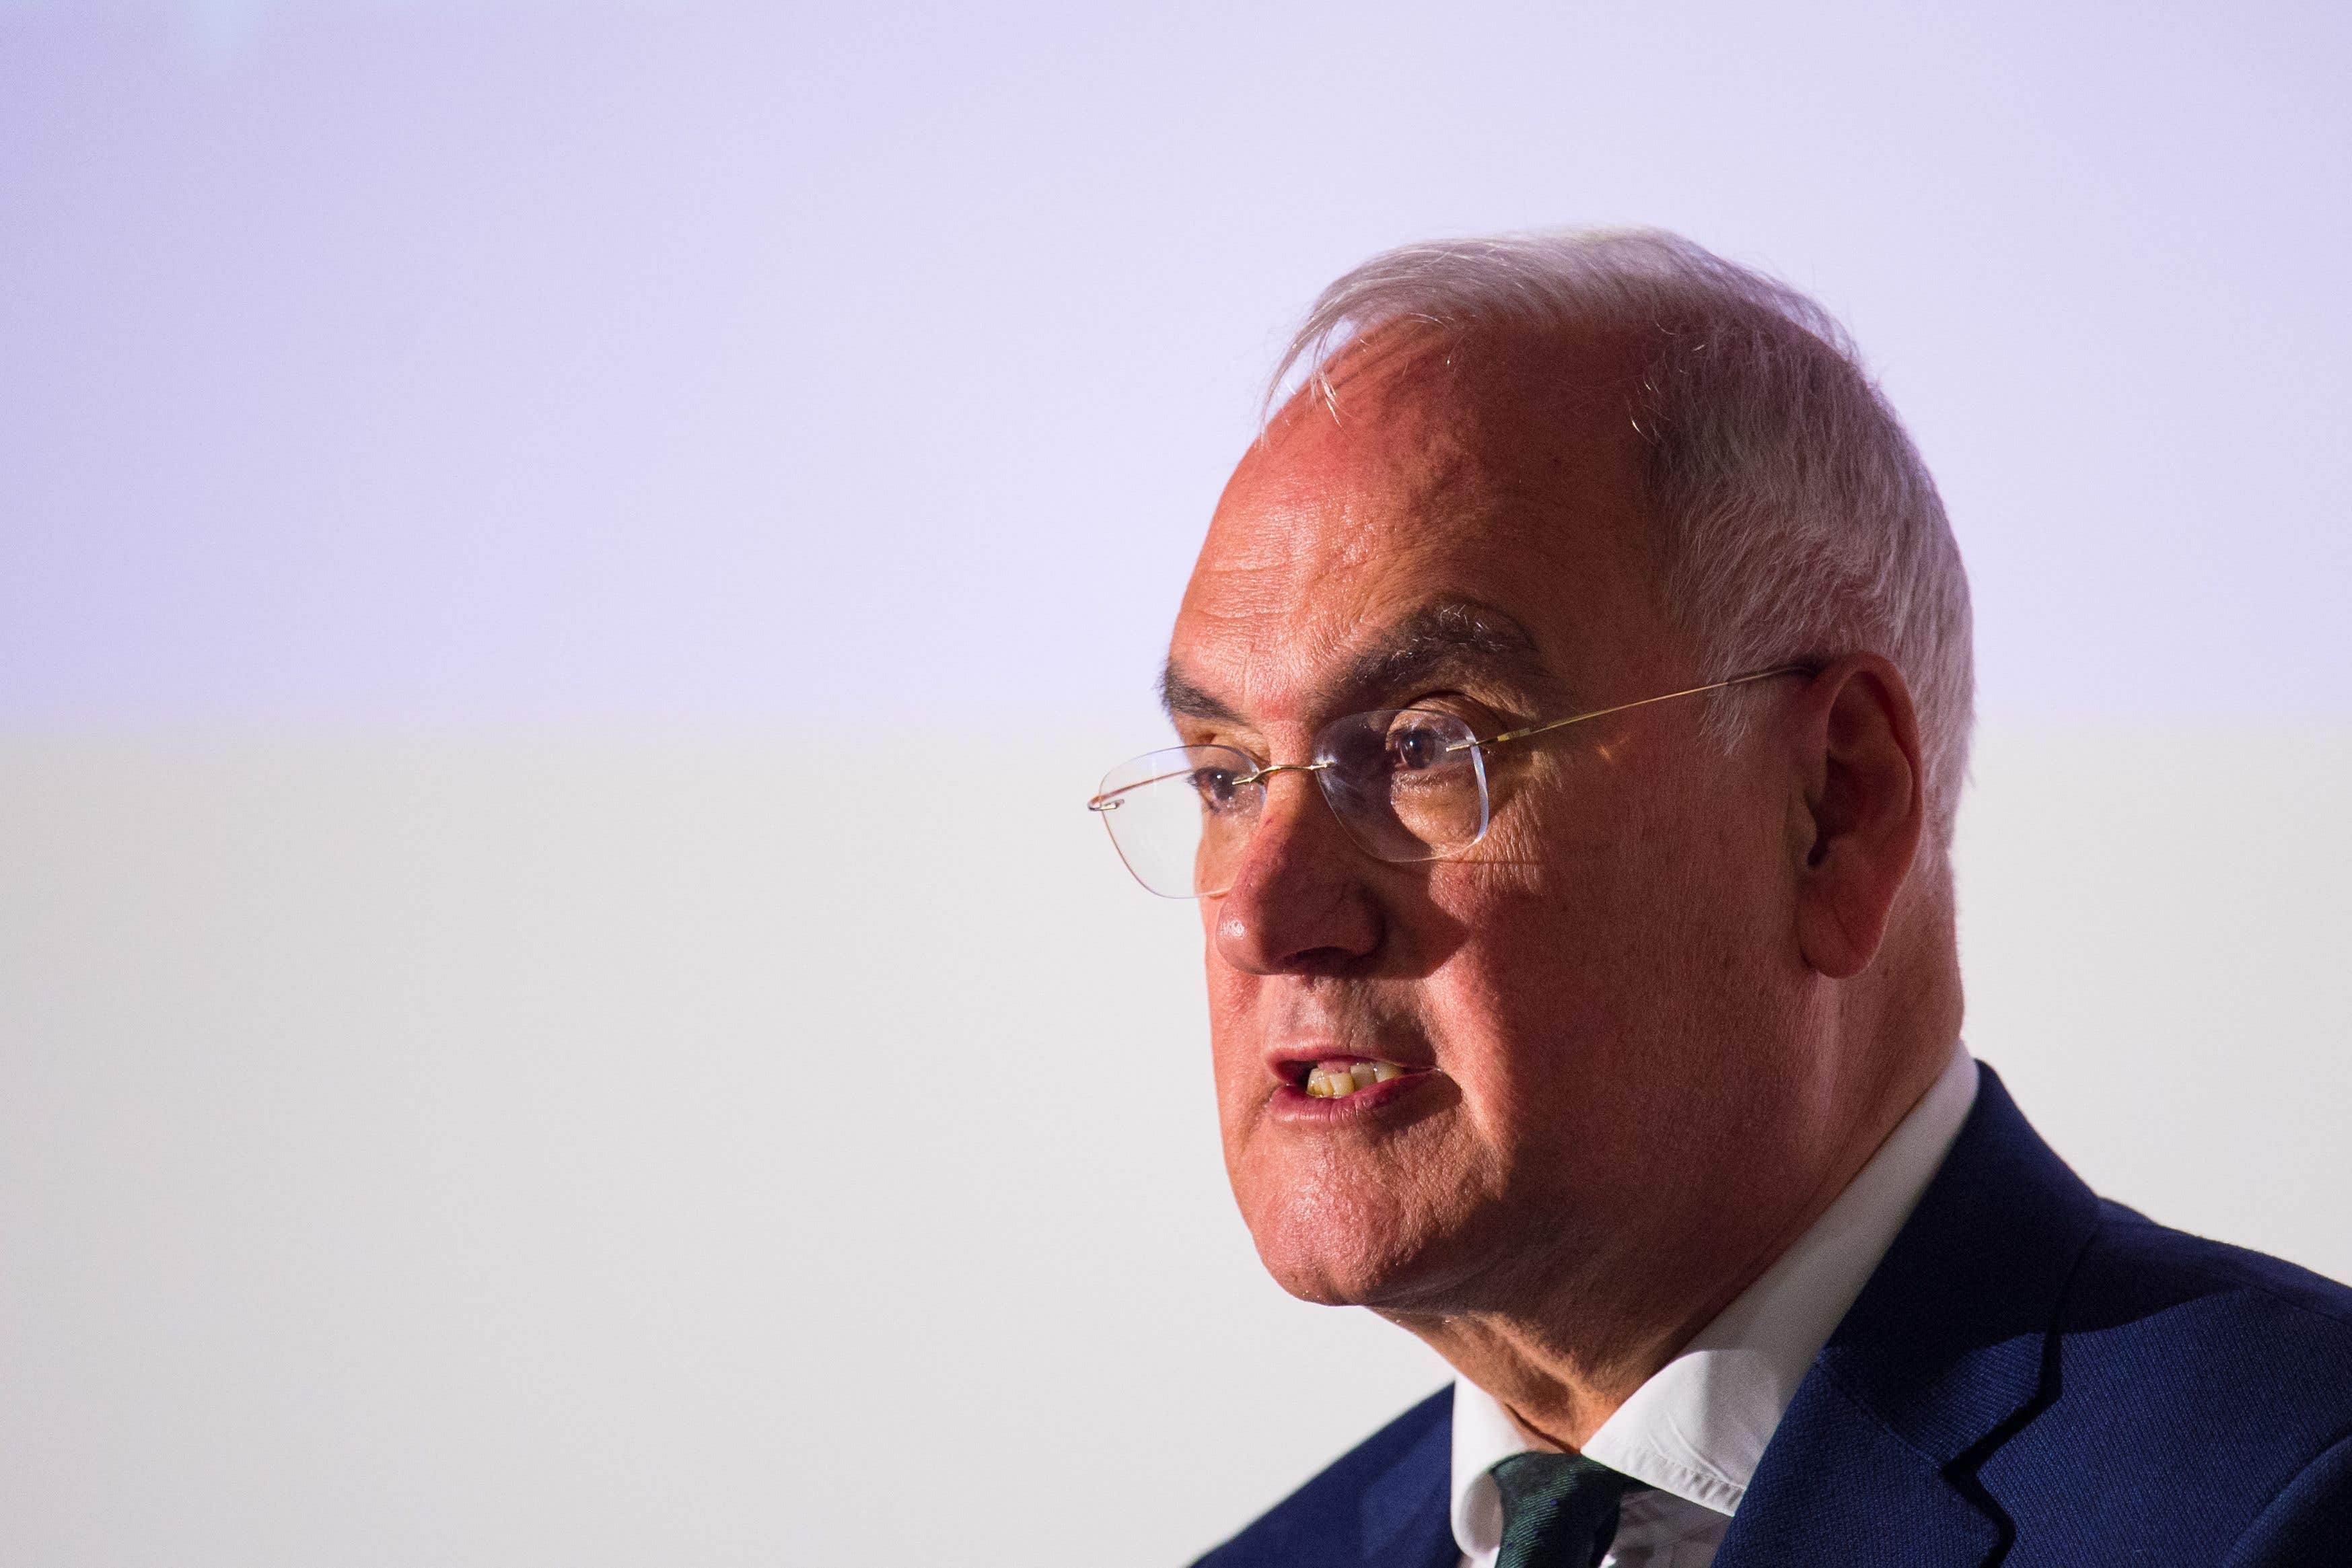 Former Ofsted chief Sir Michael Wilshaw has called for reform (Dominic Lipinski/PA)